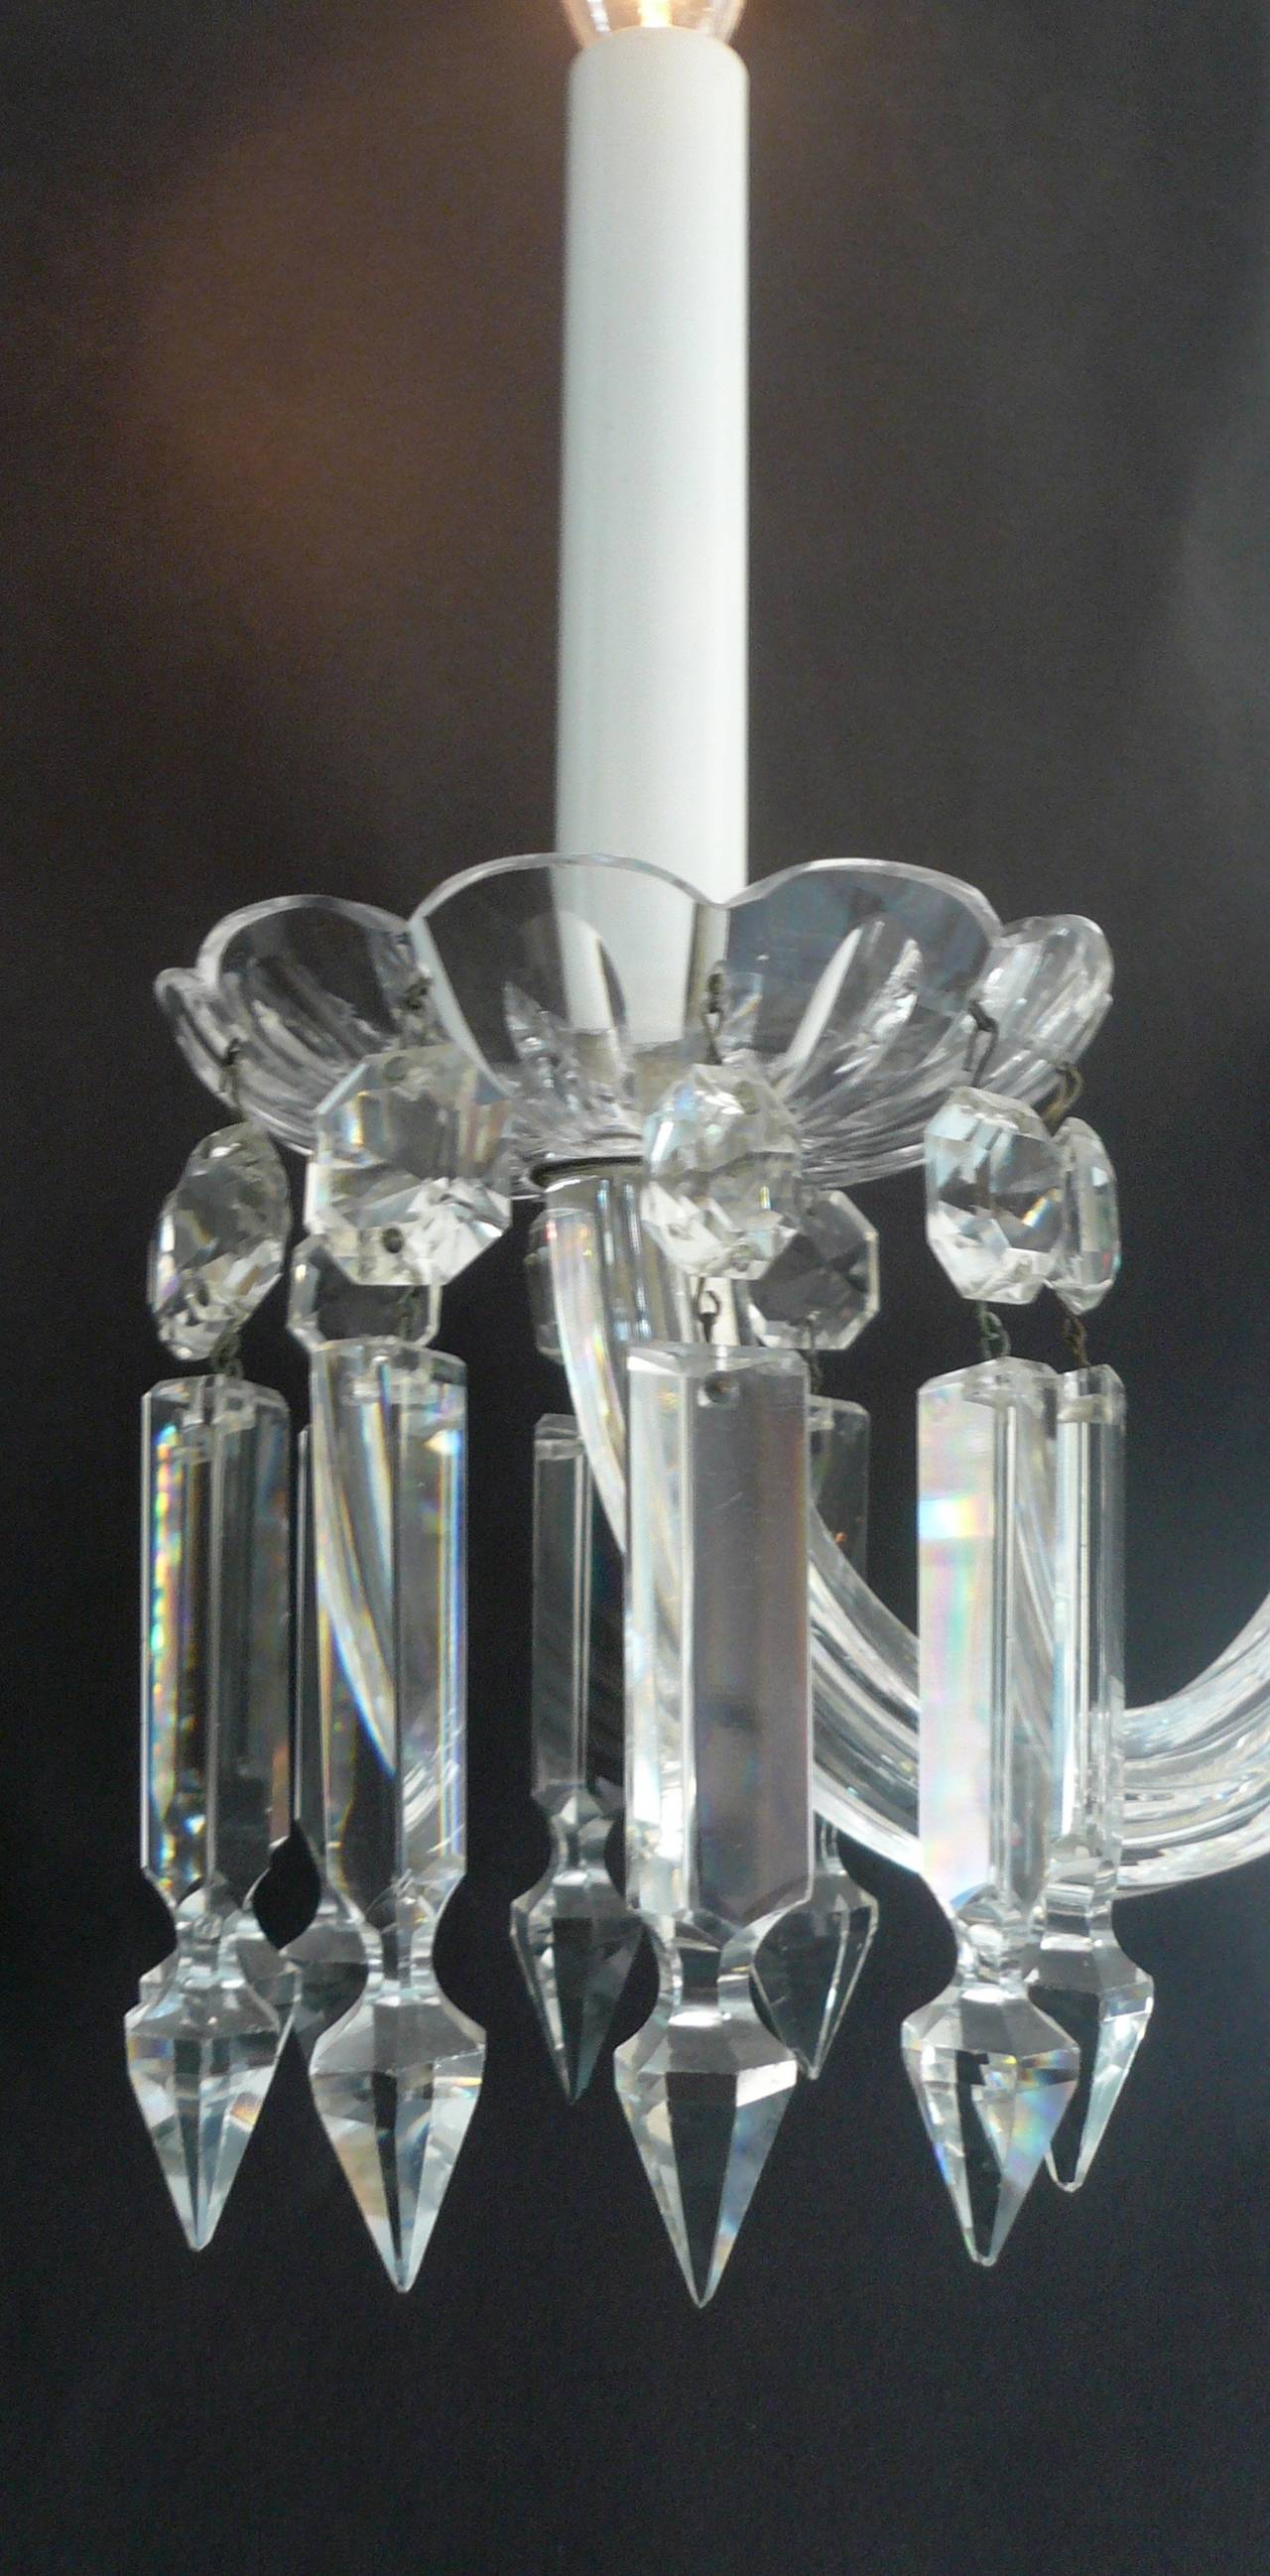 Fine quality mid-19th century six-light chandelier, originally gas powered, now electrified, signed F. & C. Osler. Osler was a leading maker of lighting fixtures and made the crystal fountain for the Crystal Palace Exhibition of 1851. Measures: The